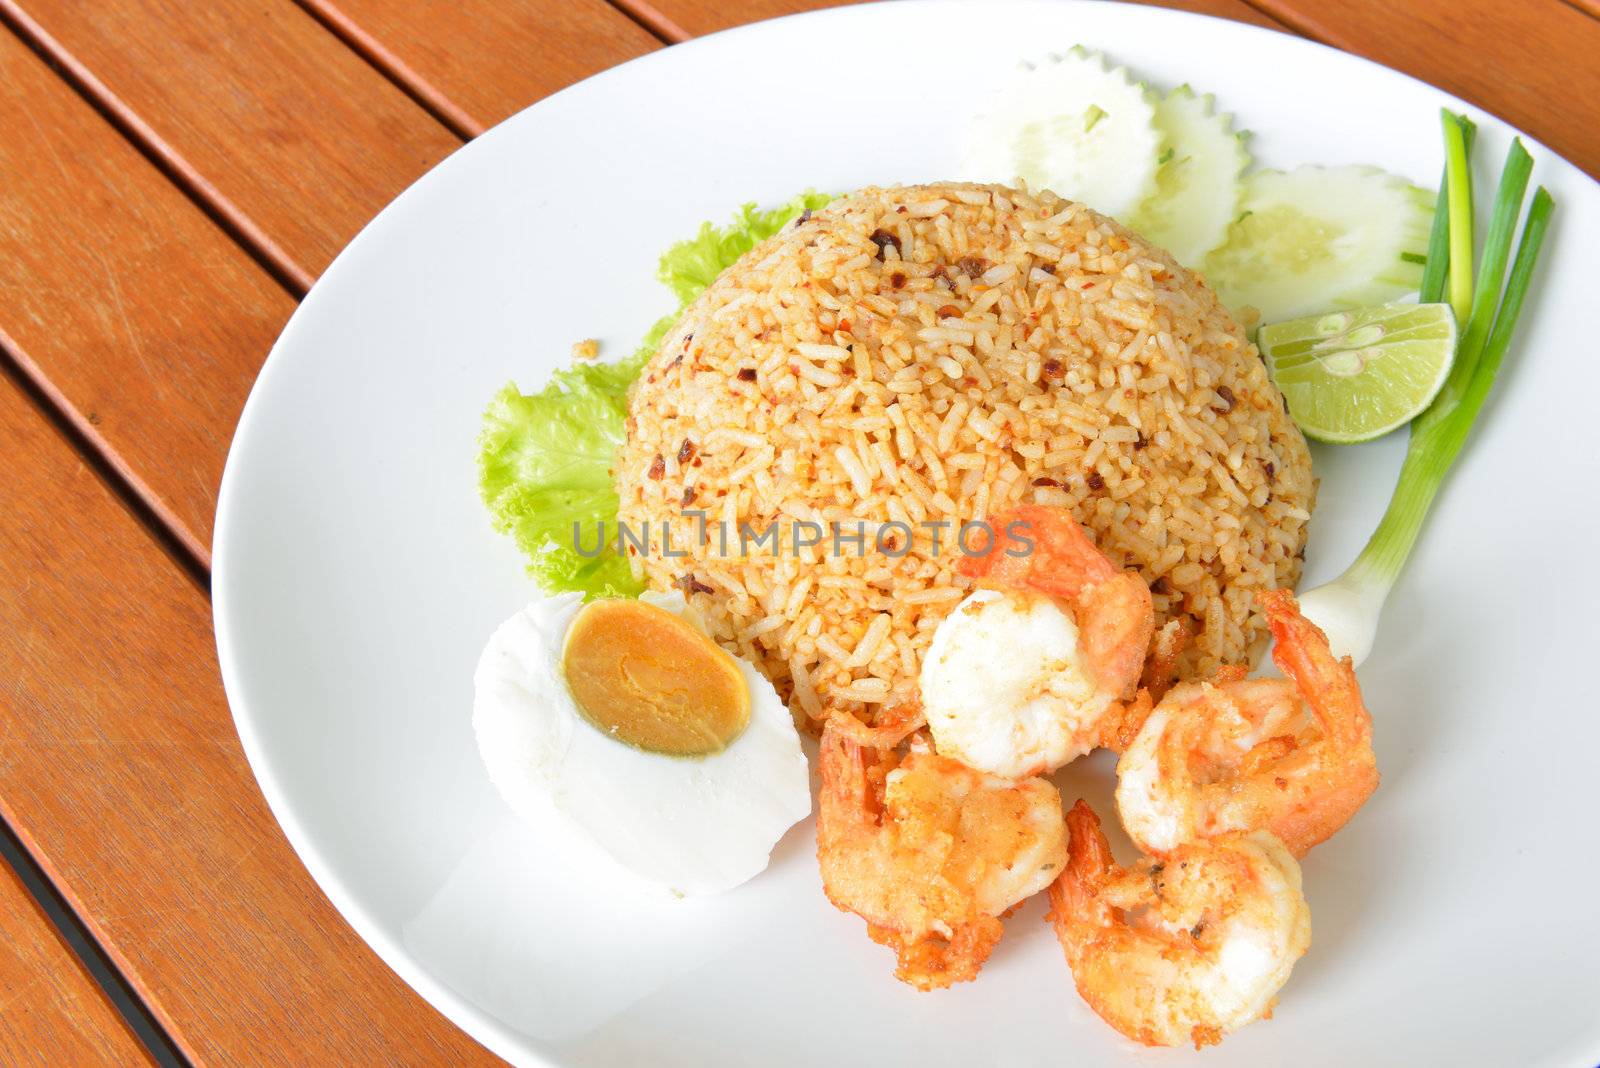 Thai food style call "Fried rice with chili paste" served with fried shrimp and salted egg.